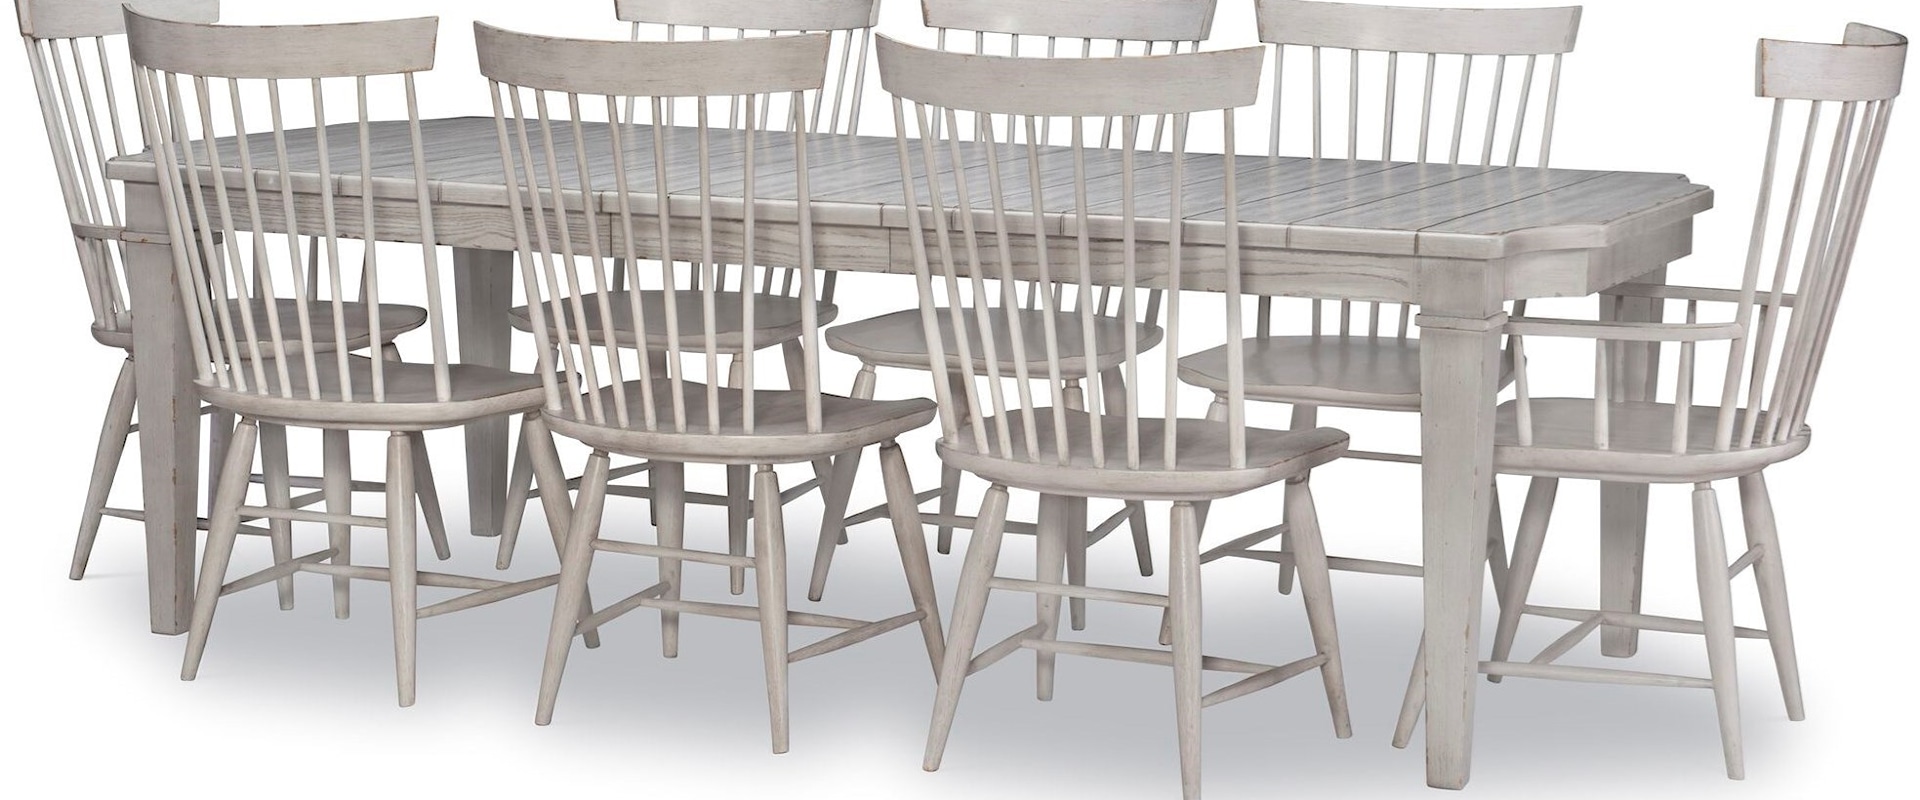 9-Piece Table and Chair Set